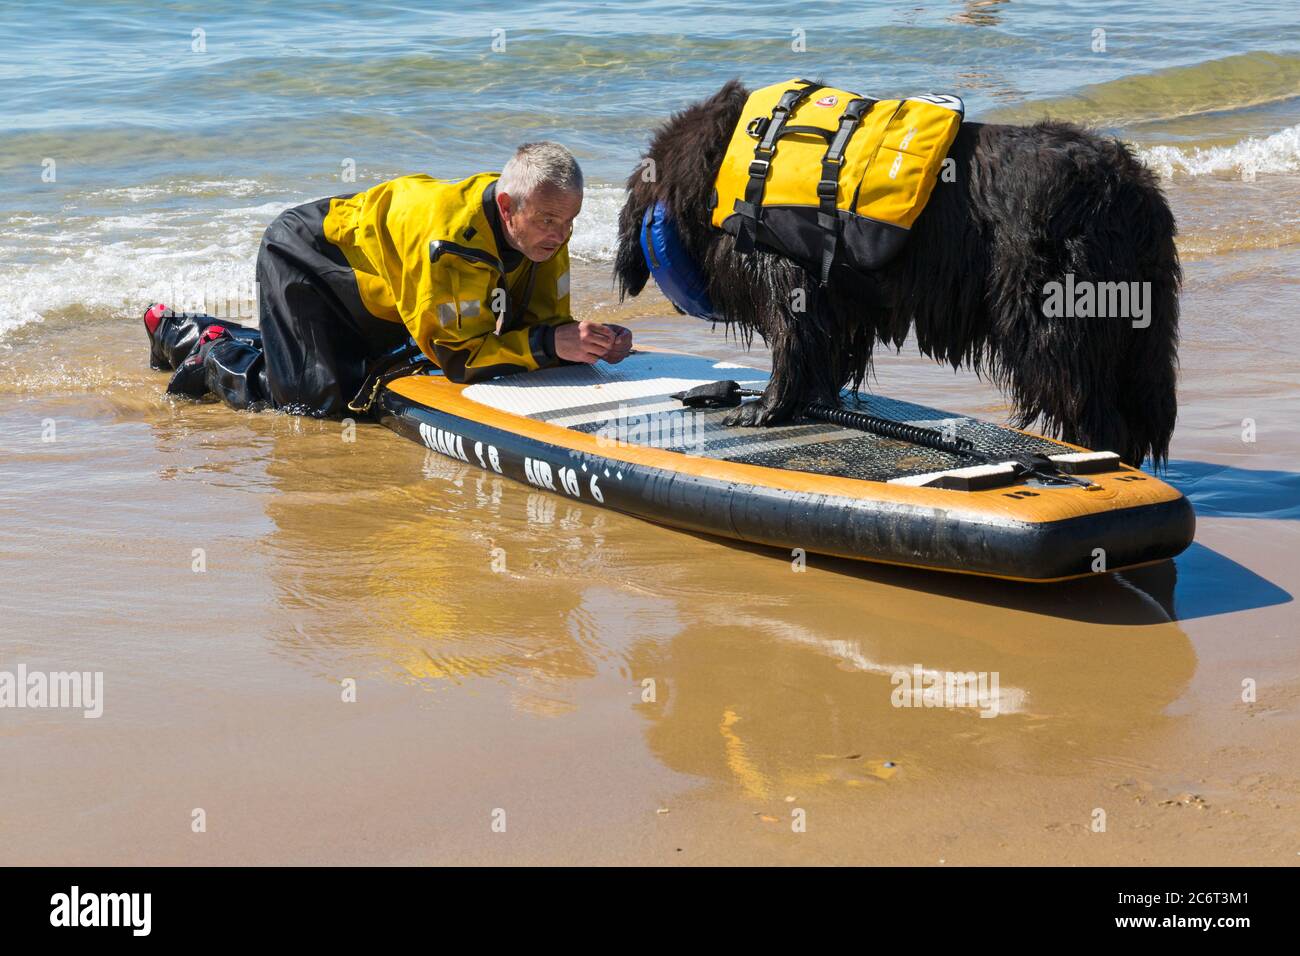 Poole, Dorset UK. 12th July 2020. UK weather: very warm sunny day at Poole beaches as dog owners take their dogs for some dog training lessons, including learning to paddle board and increase their confidence in the sea whilst enjoying the sunshine. Newfoundland dog learning to paddleboard. Credit: Carolyn Jenkins/Alamy Live News Stock Photo